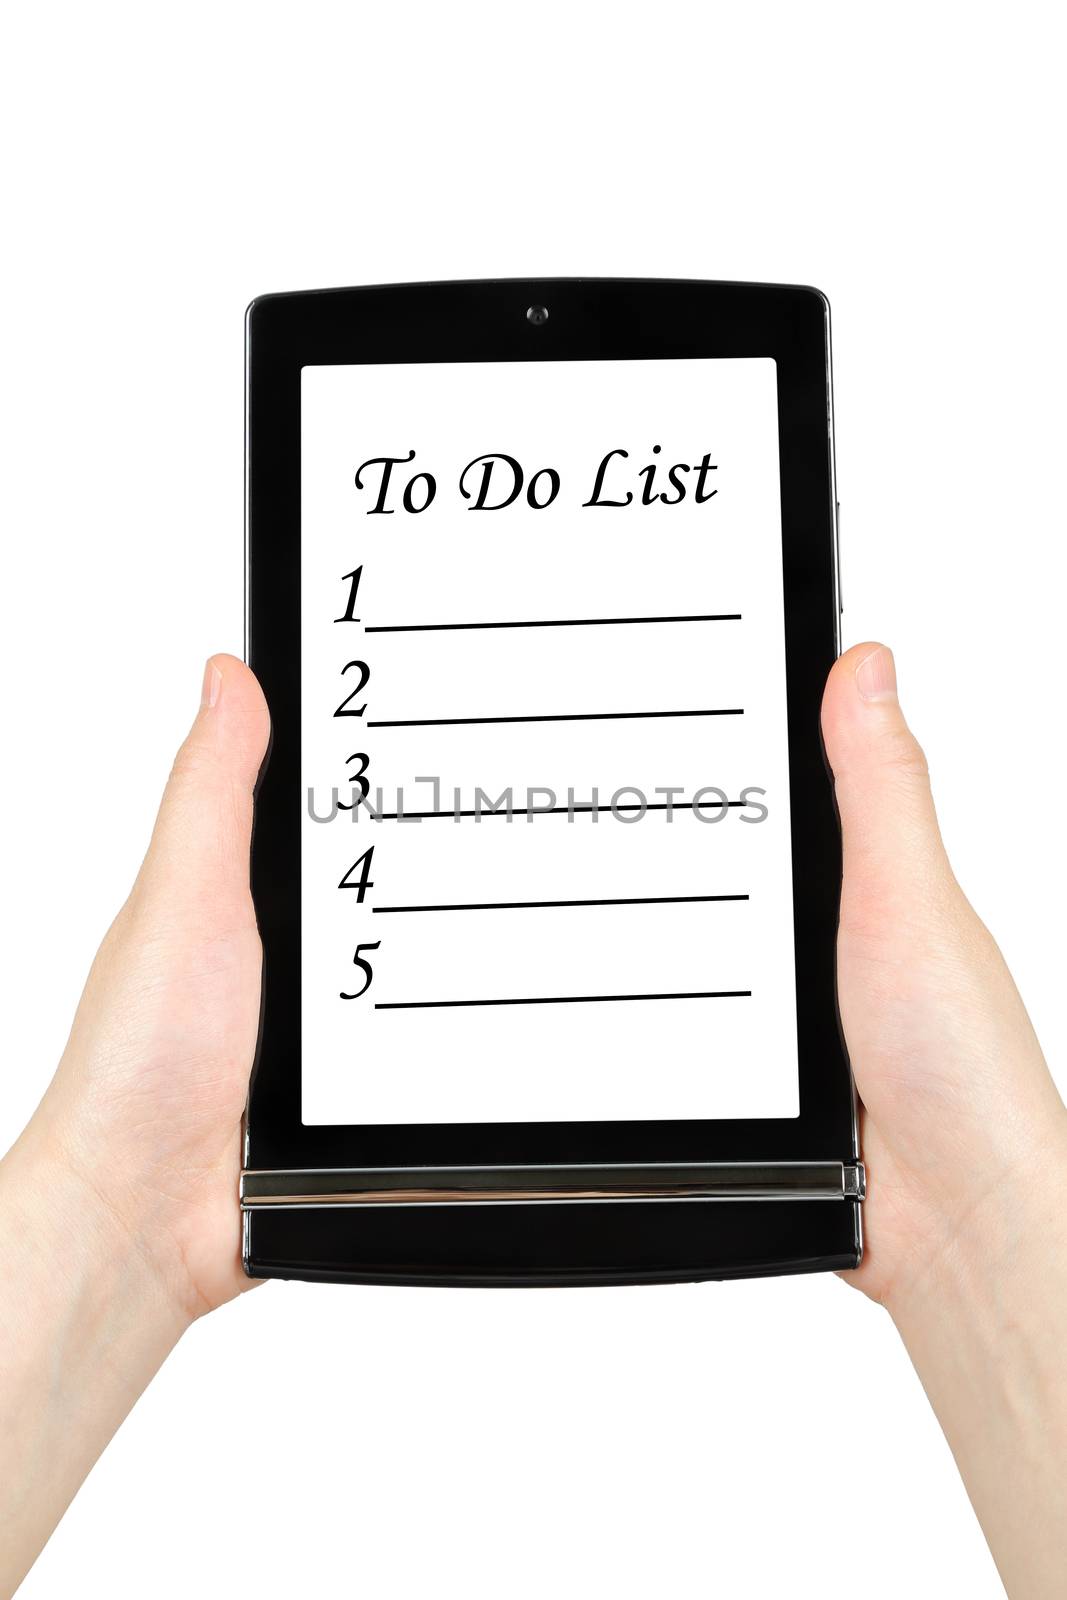 Hands holding touch screen tablet with to do list on screen